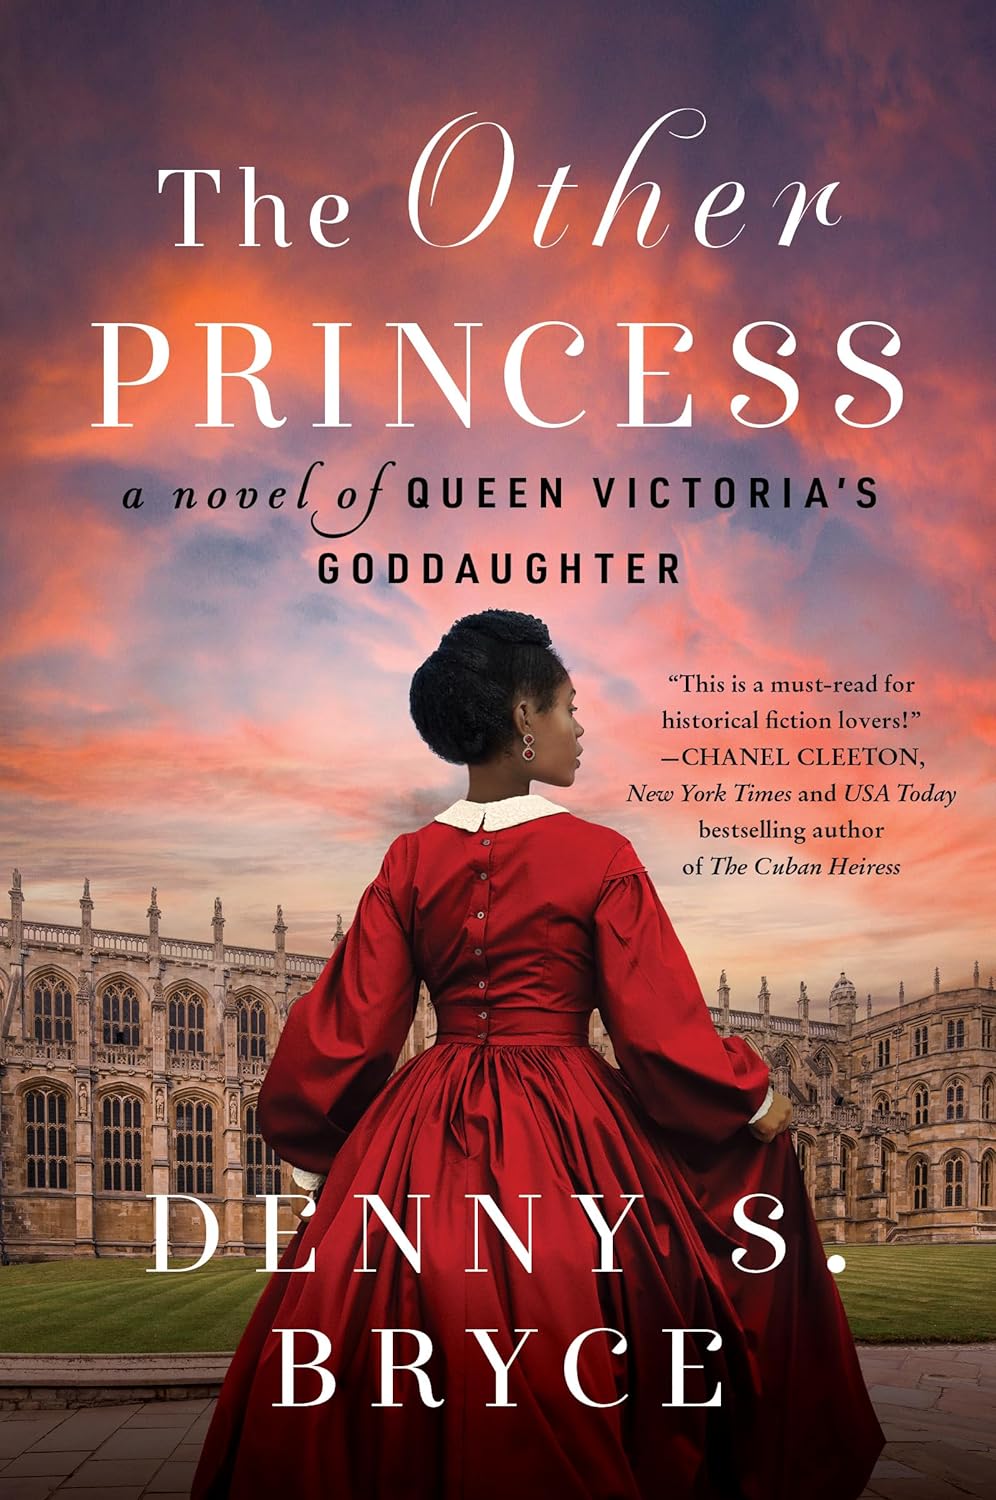 The Other Princess // A Novel of Queen Victoria's Goddaughter